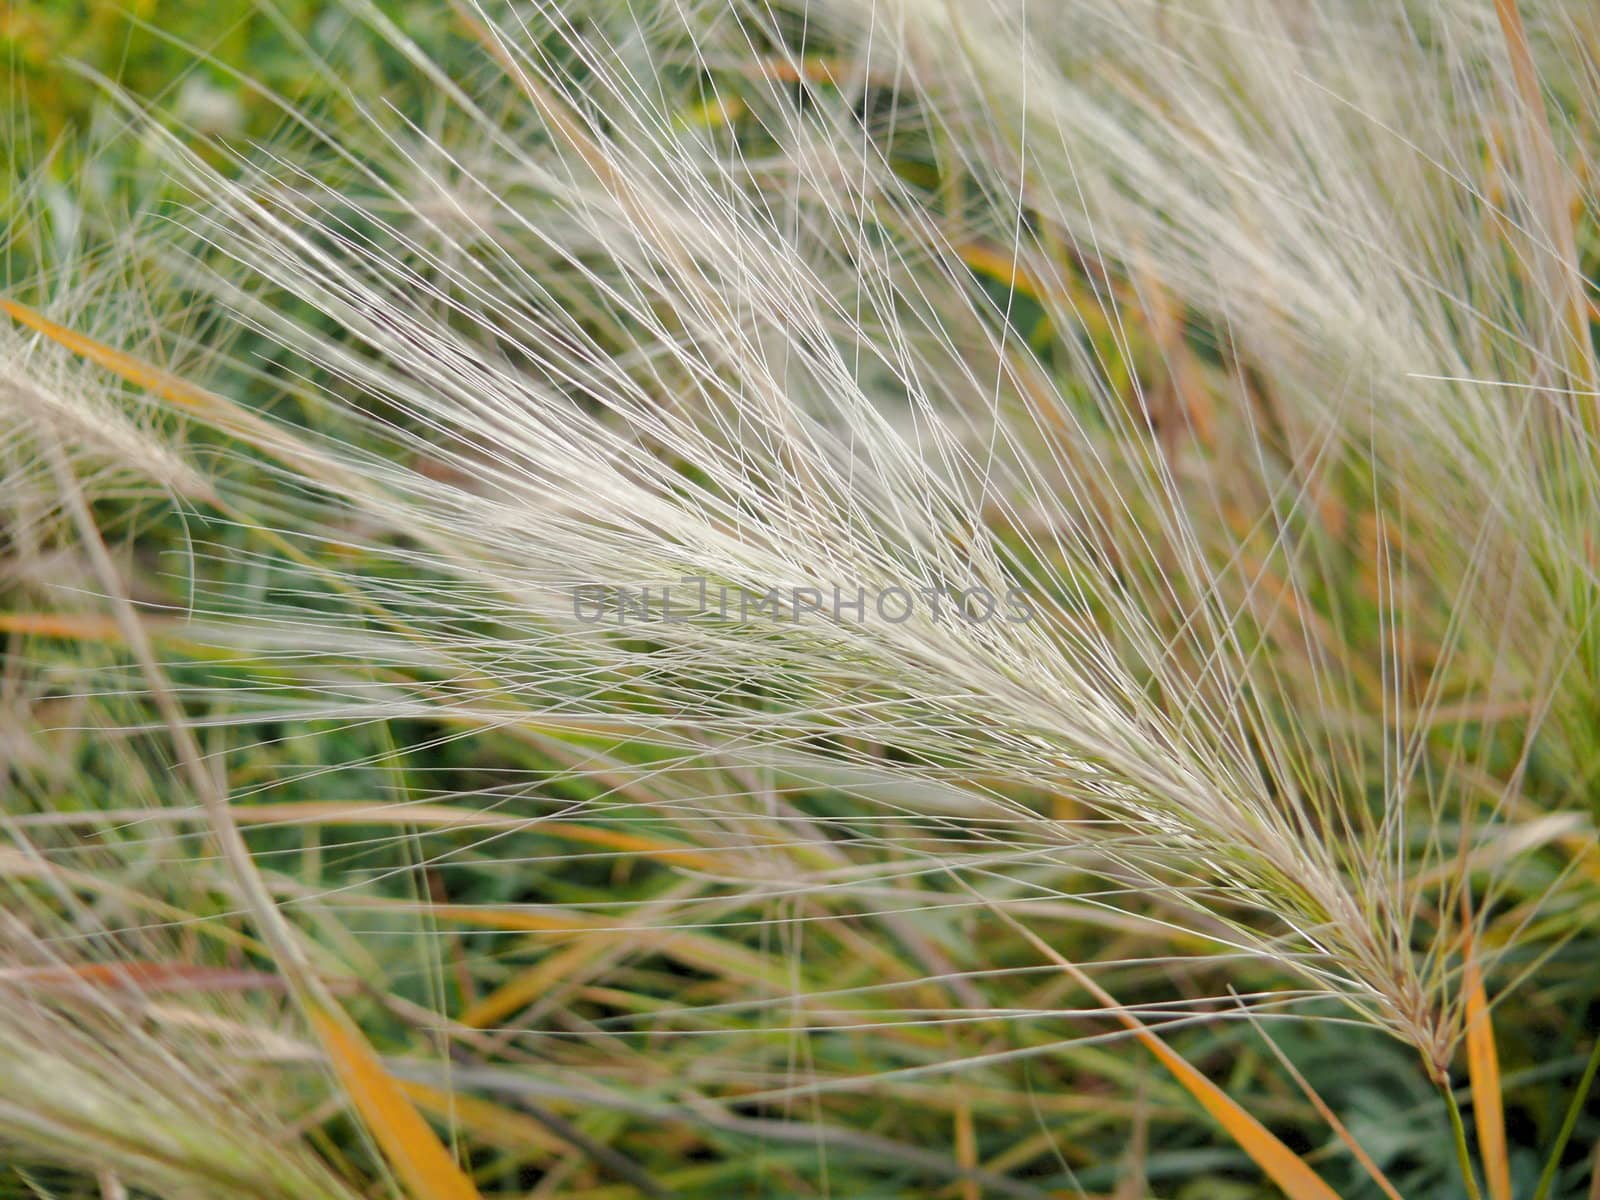 Texture of feather grass